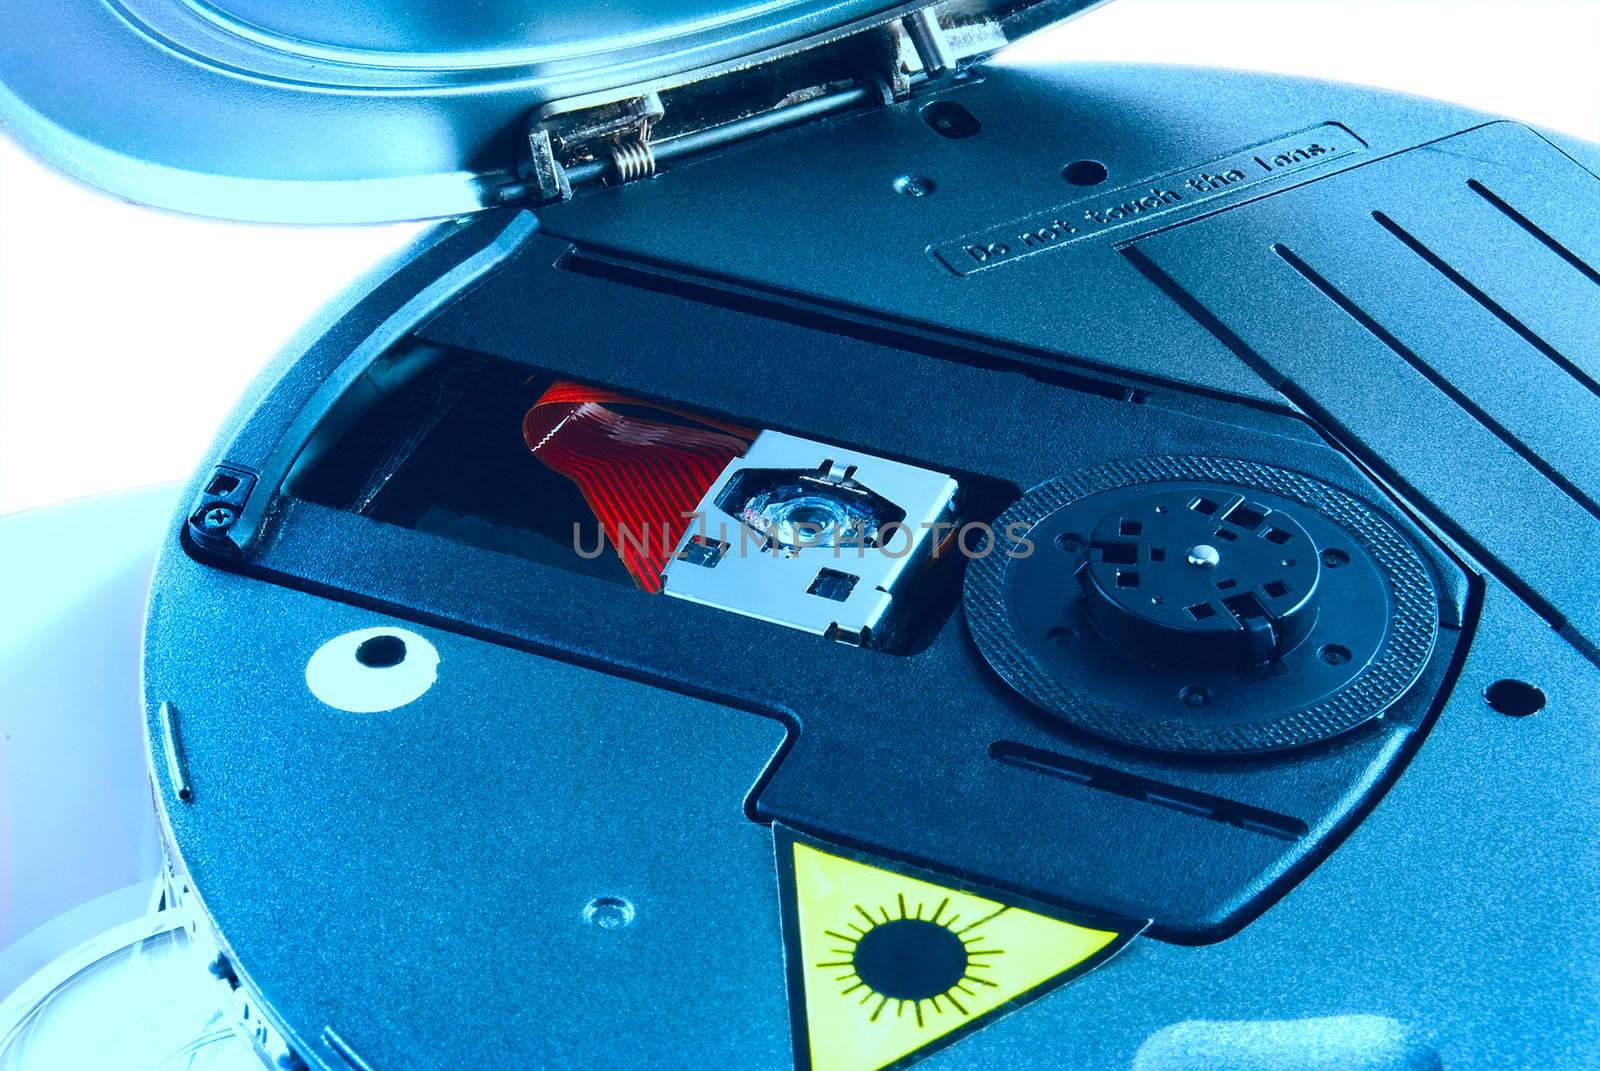 Laser head of the CD-player is photographed close-up